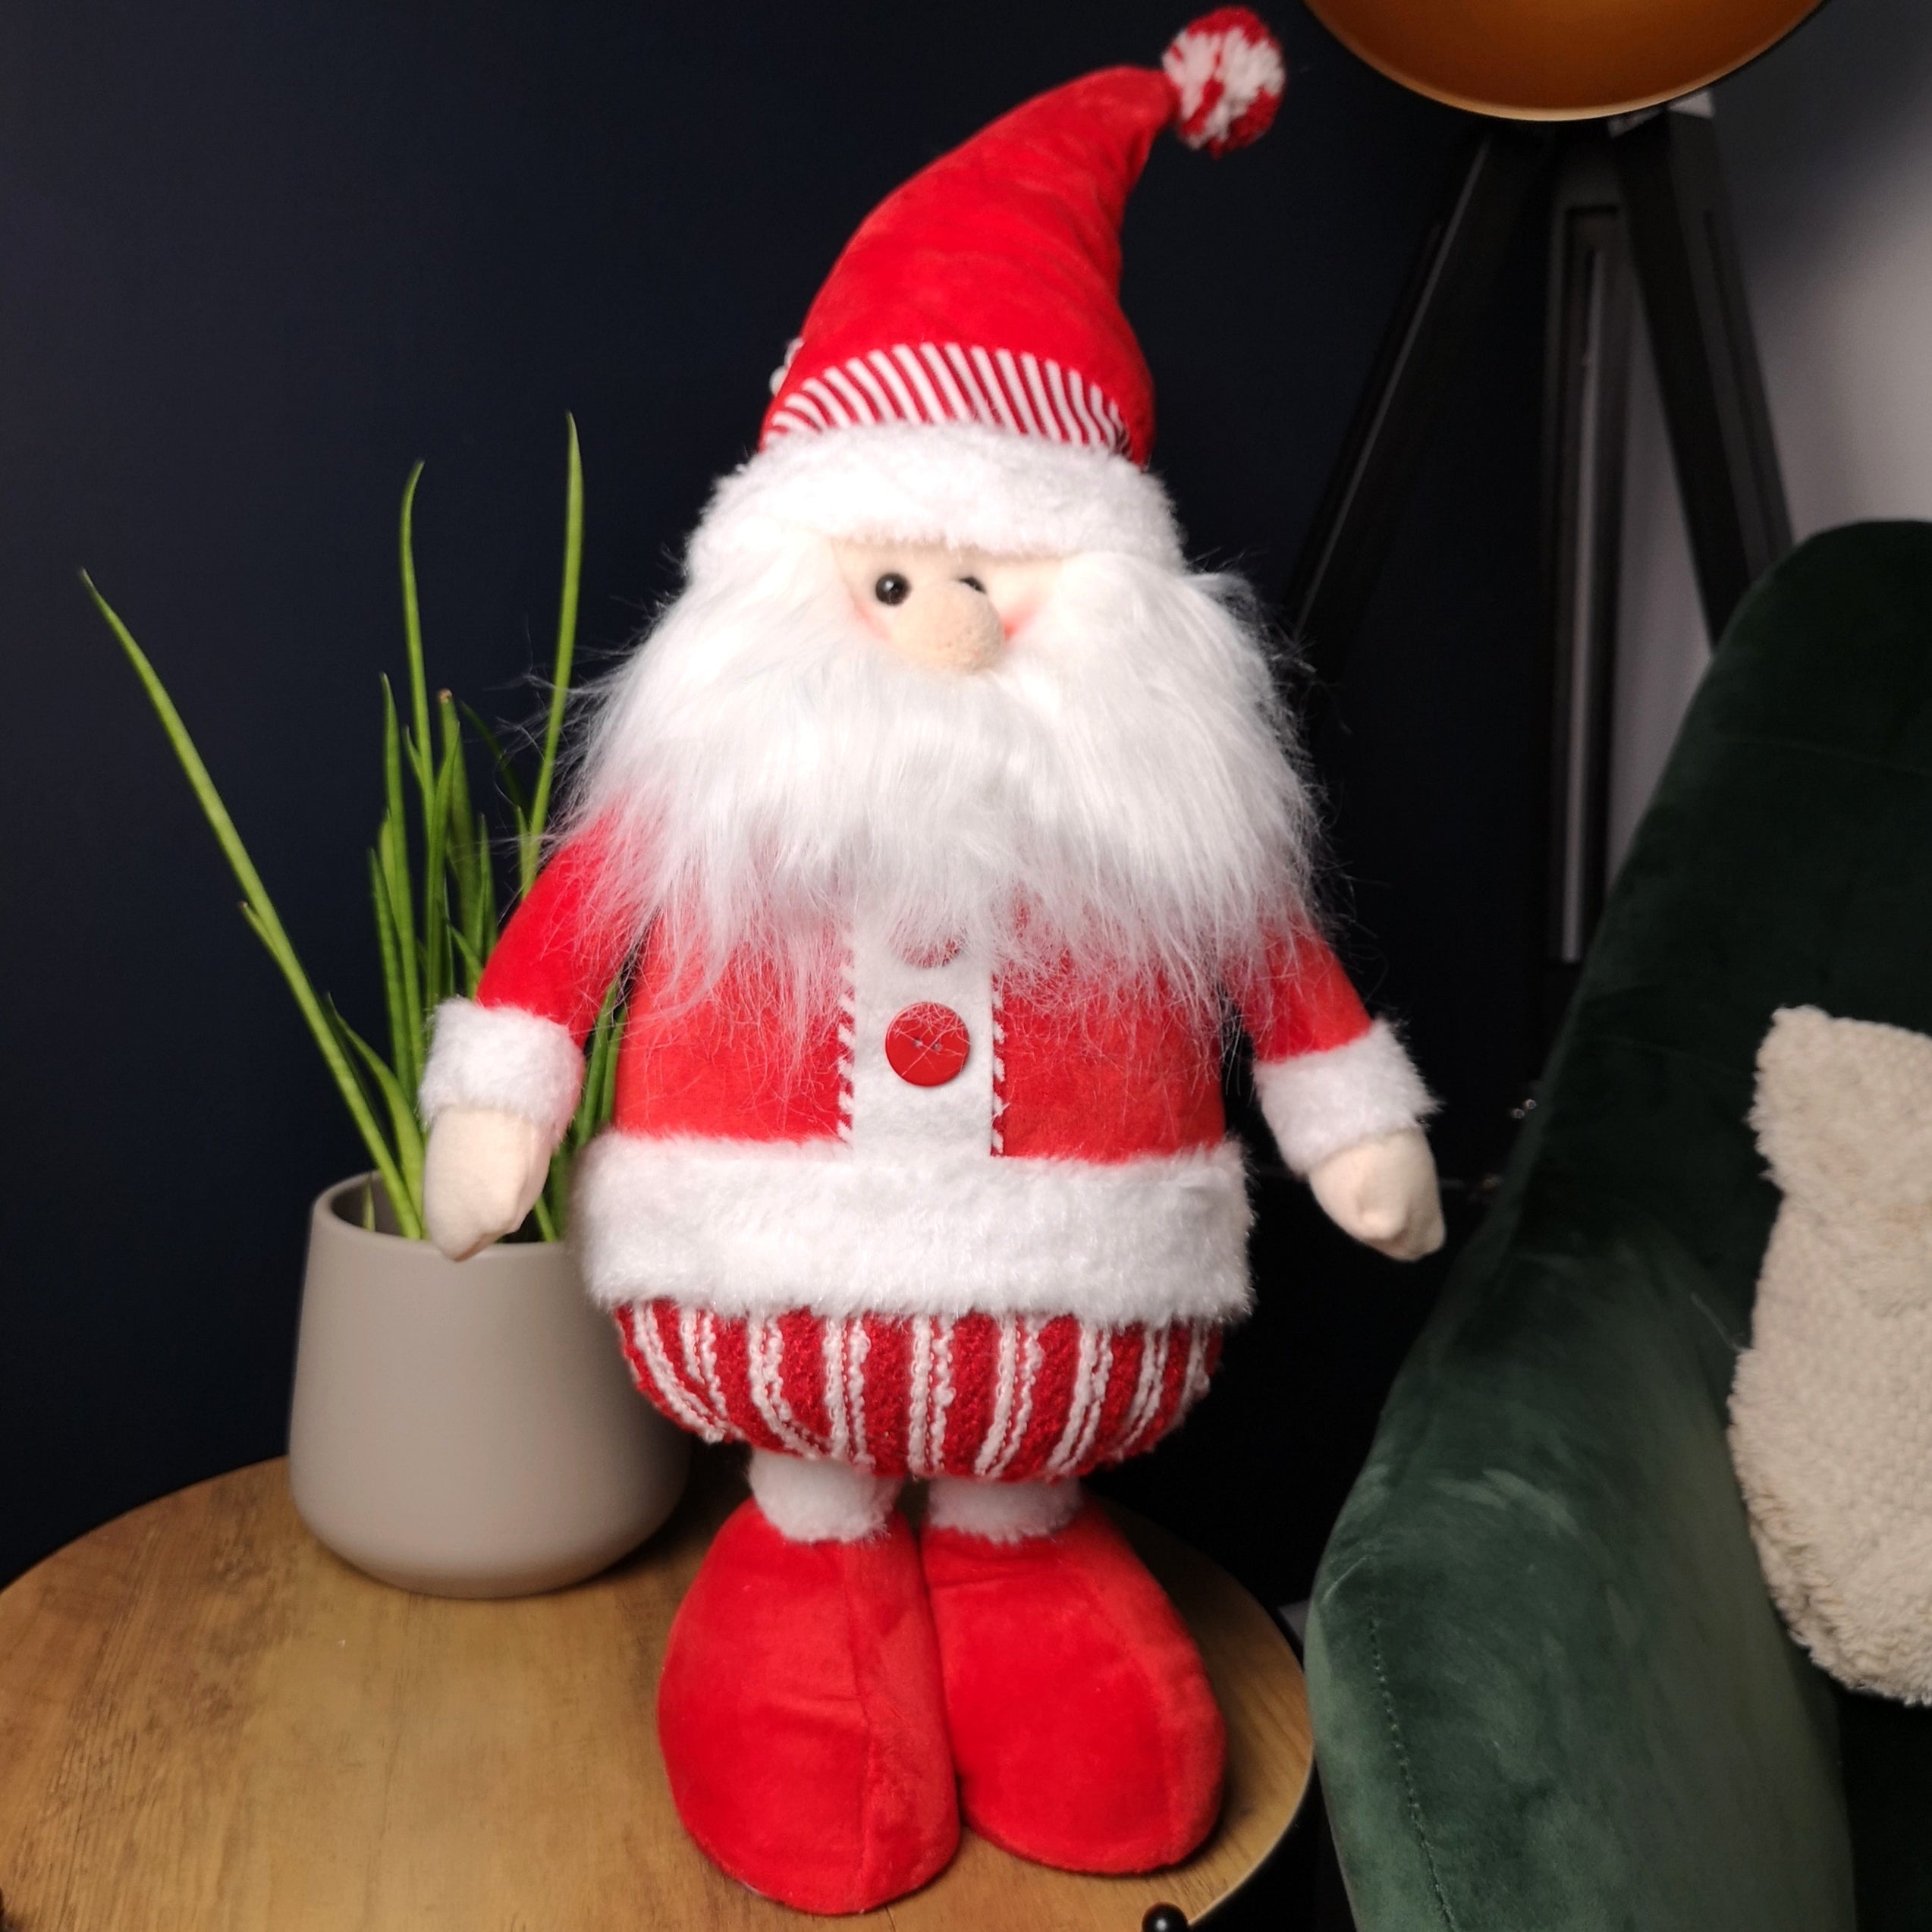 94cm Red and White Standing Santa with Telescopic Legs Christmas Decoration